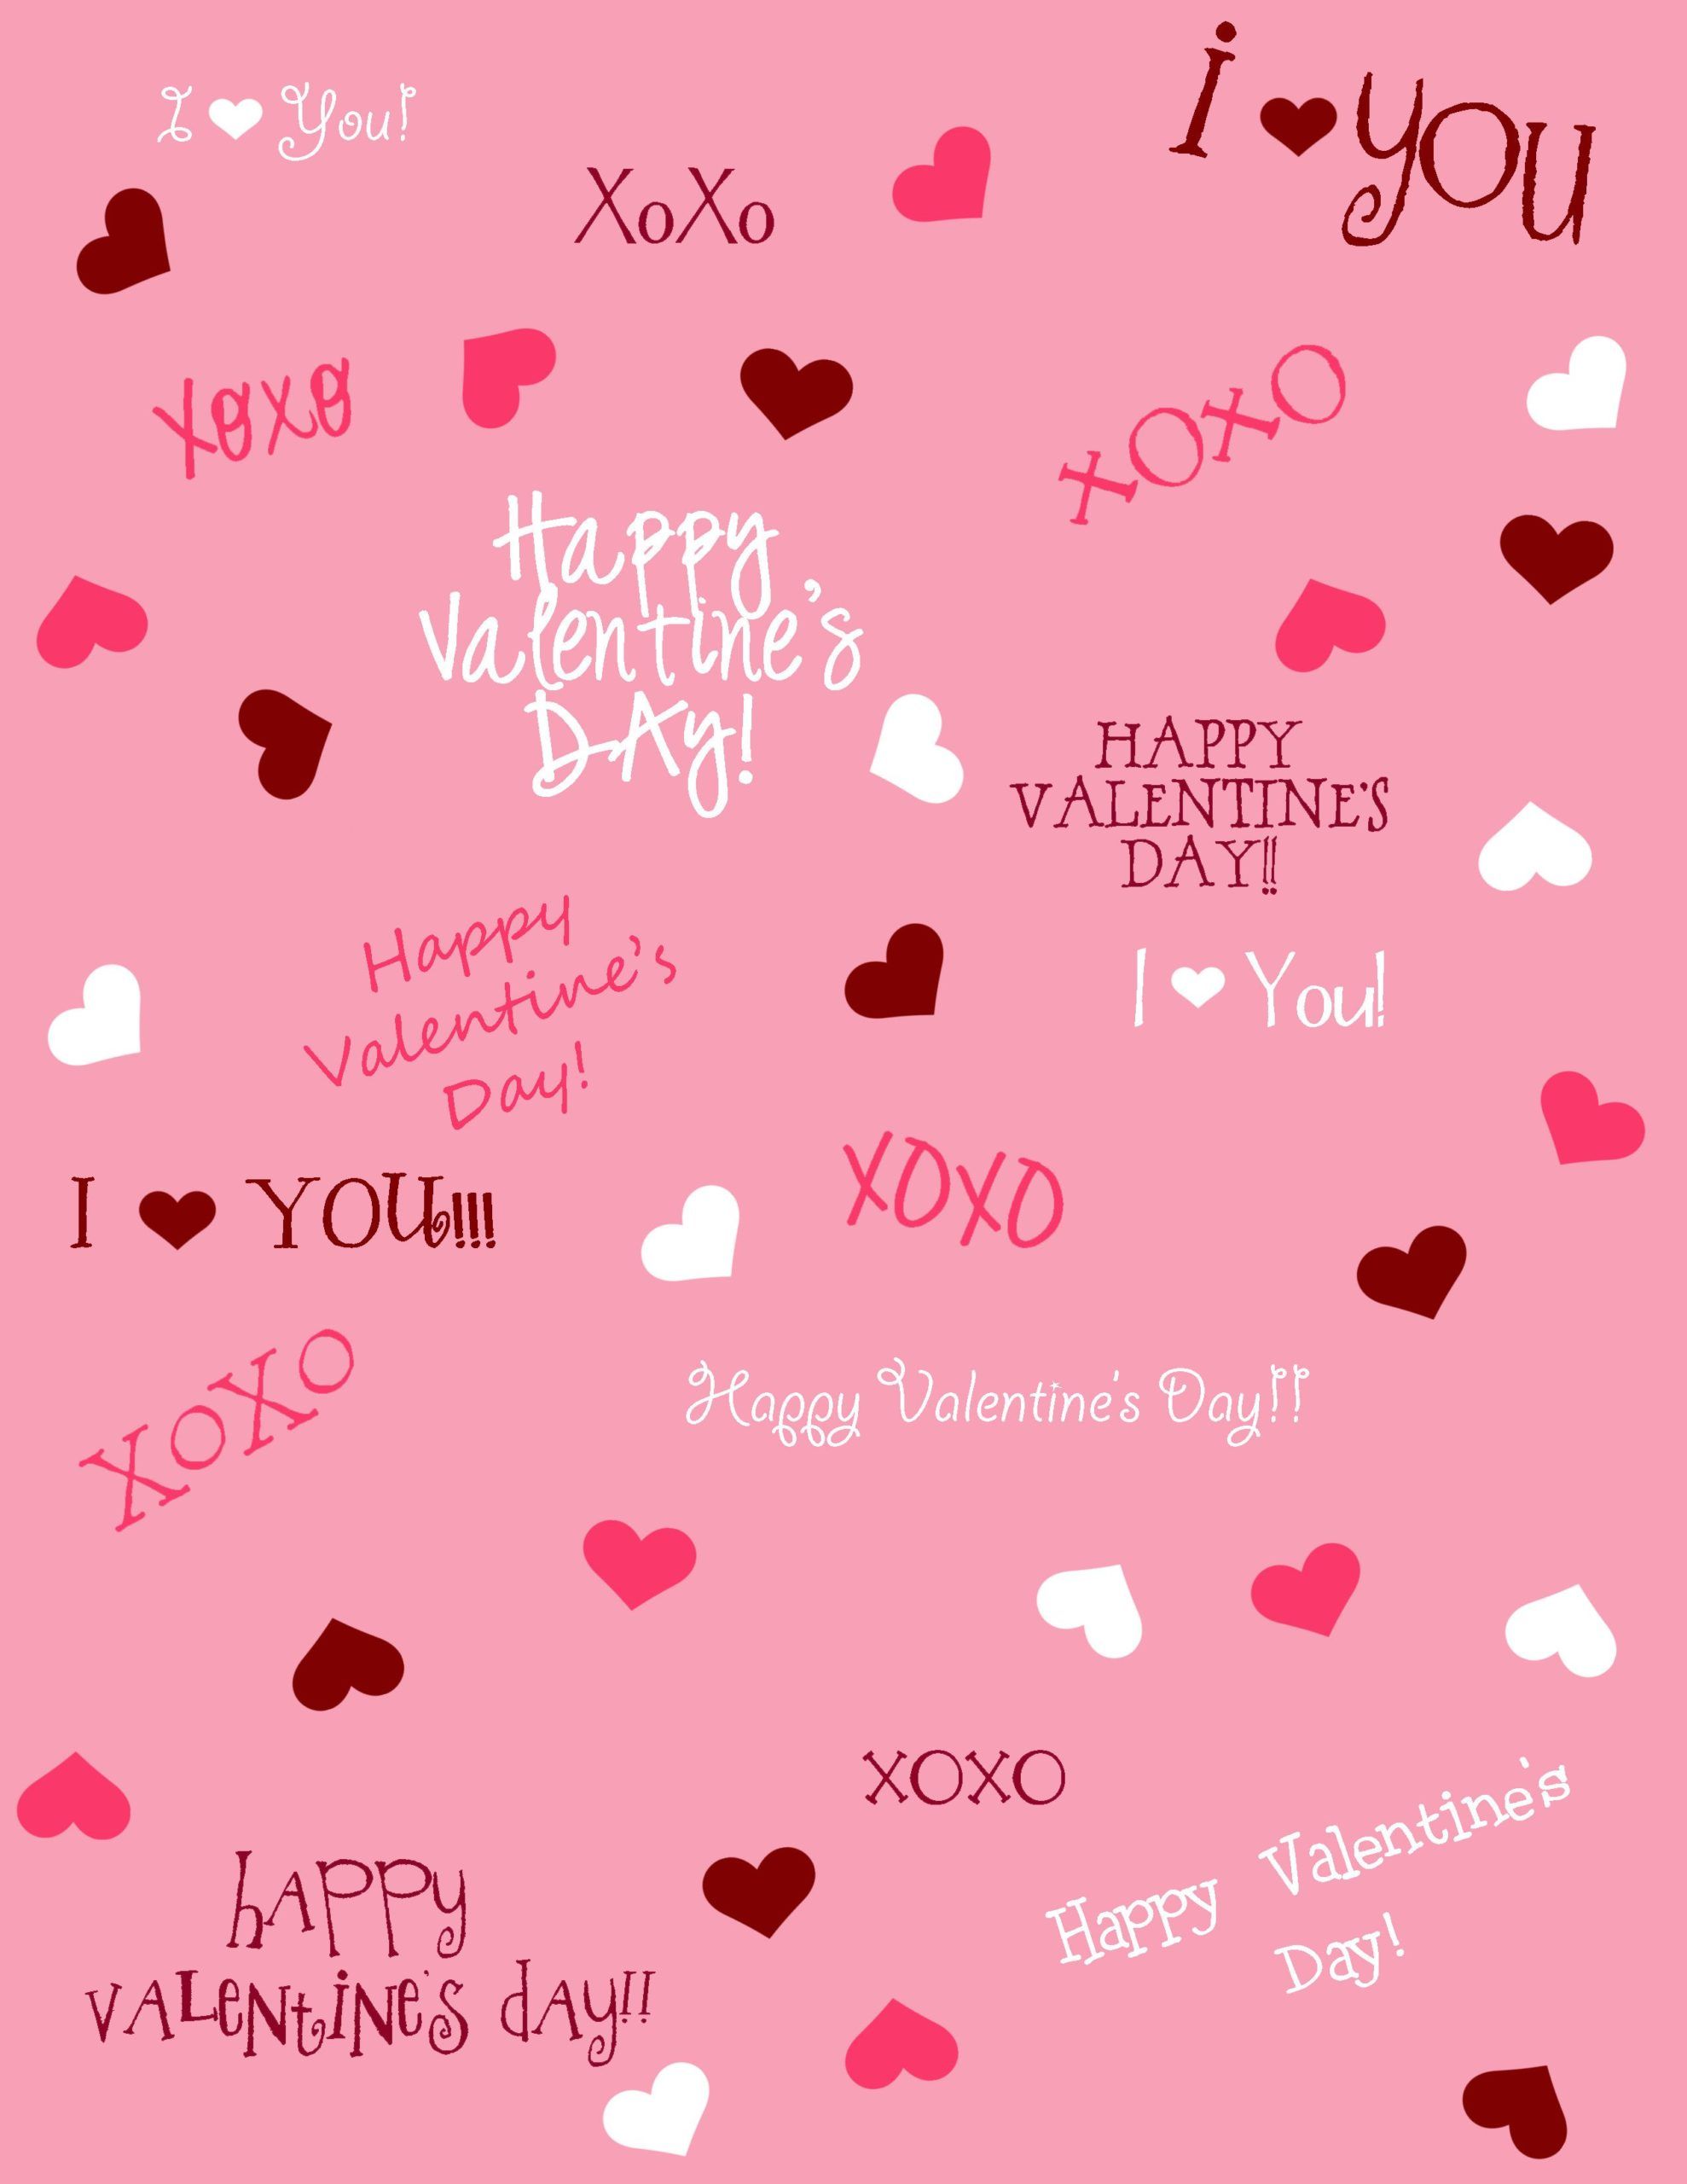 iPhone Wallpaper, free valentine scrapbook paper Search & Drawing Community, Explore & Discover the best and the most inspiring Art & Drawings ideas & trends from